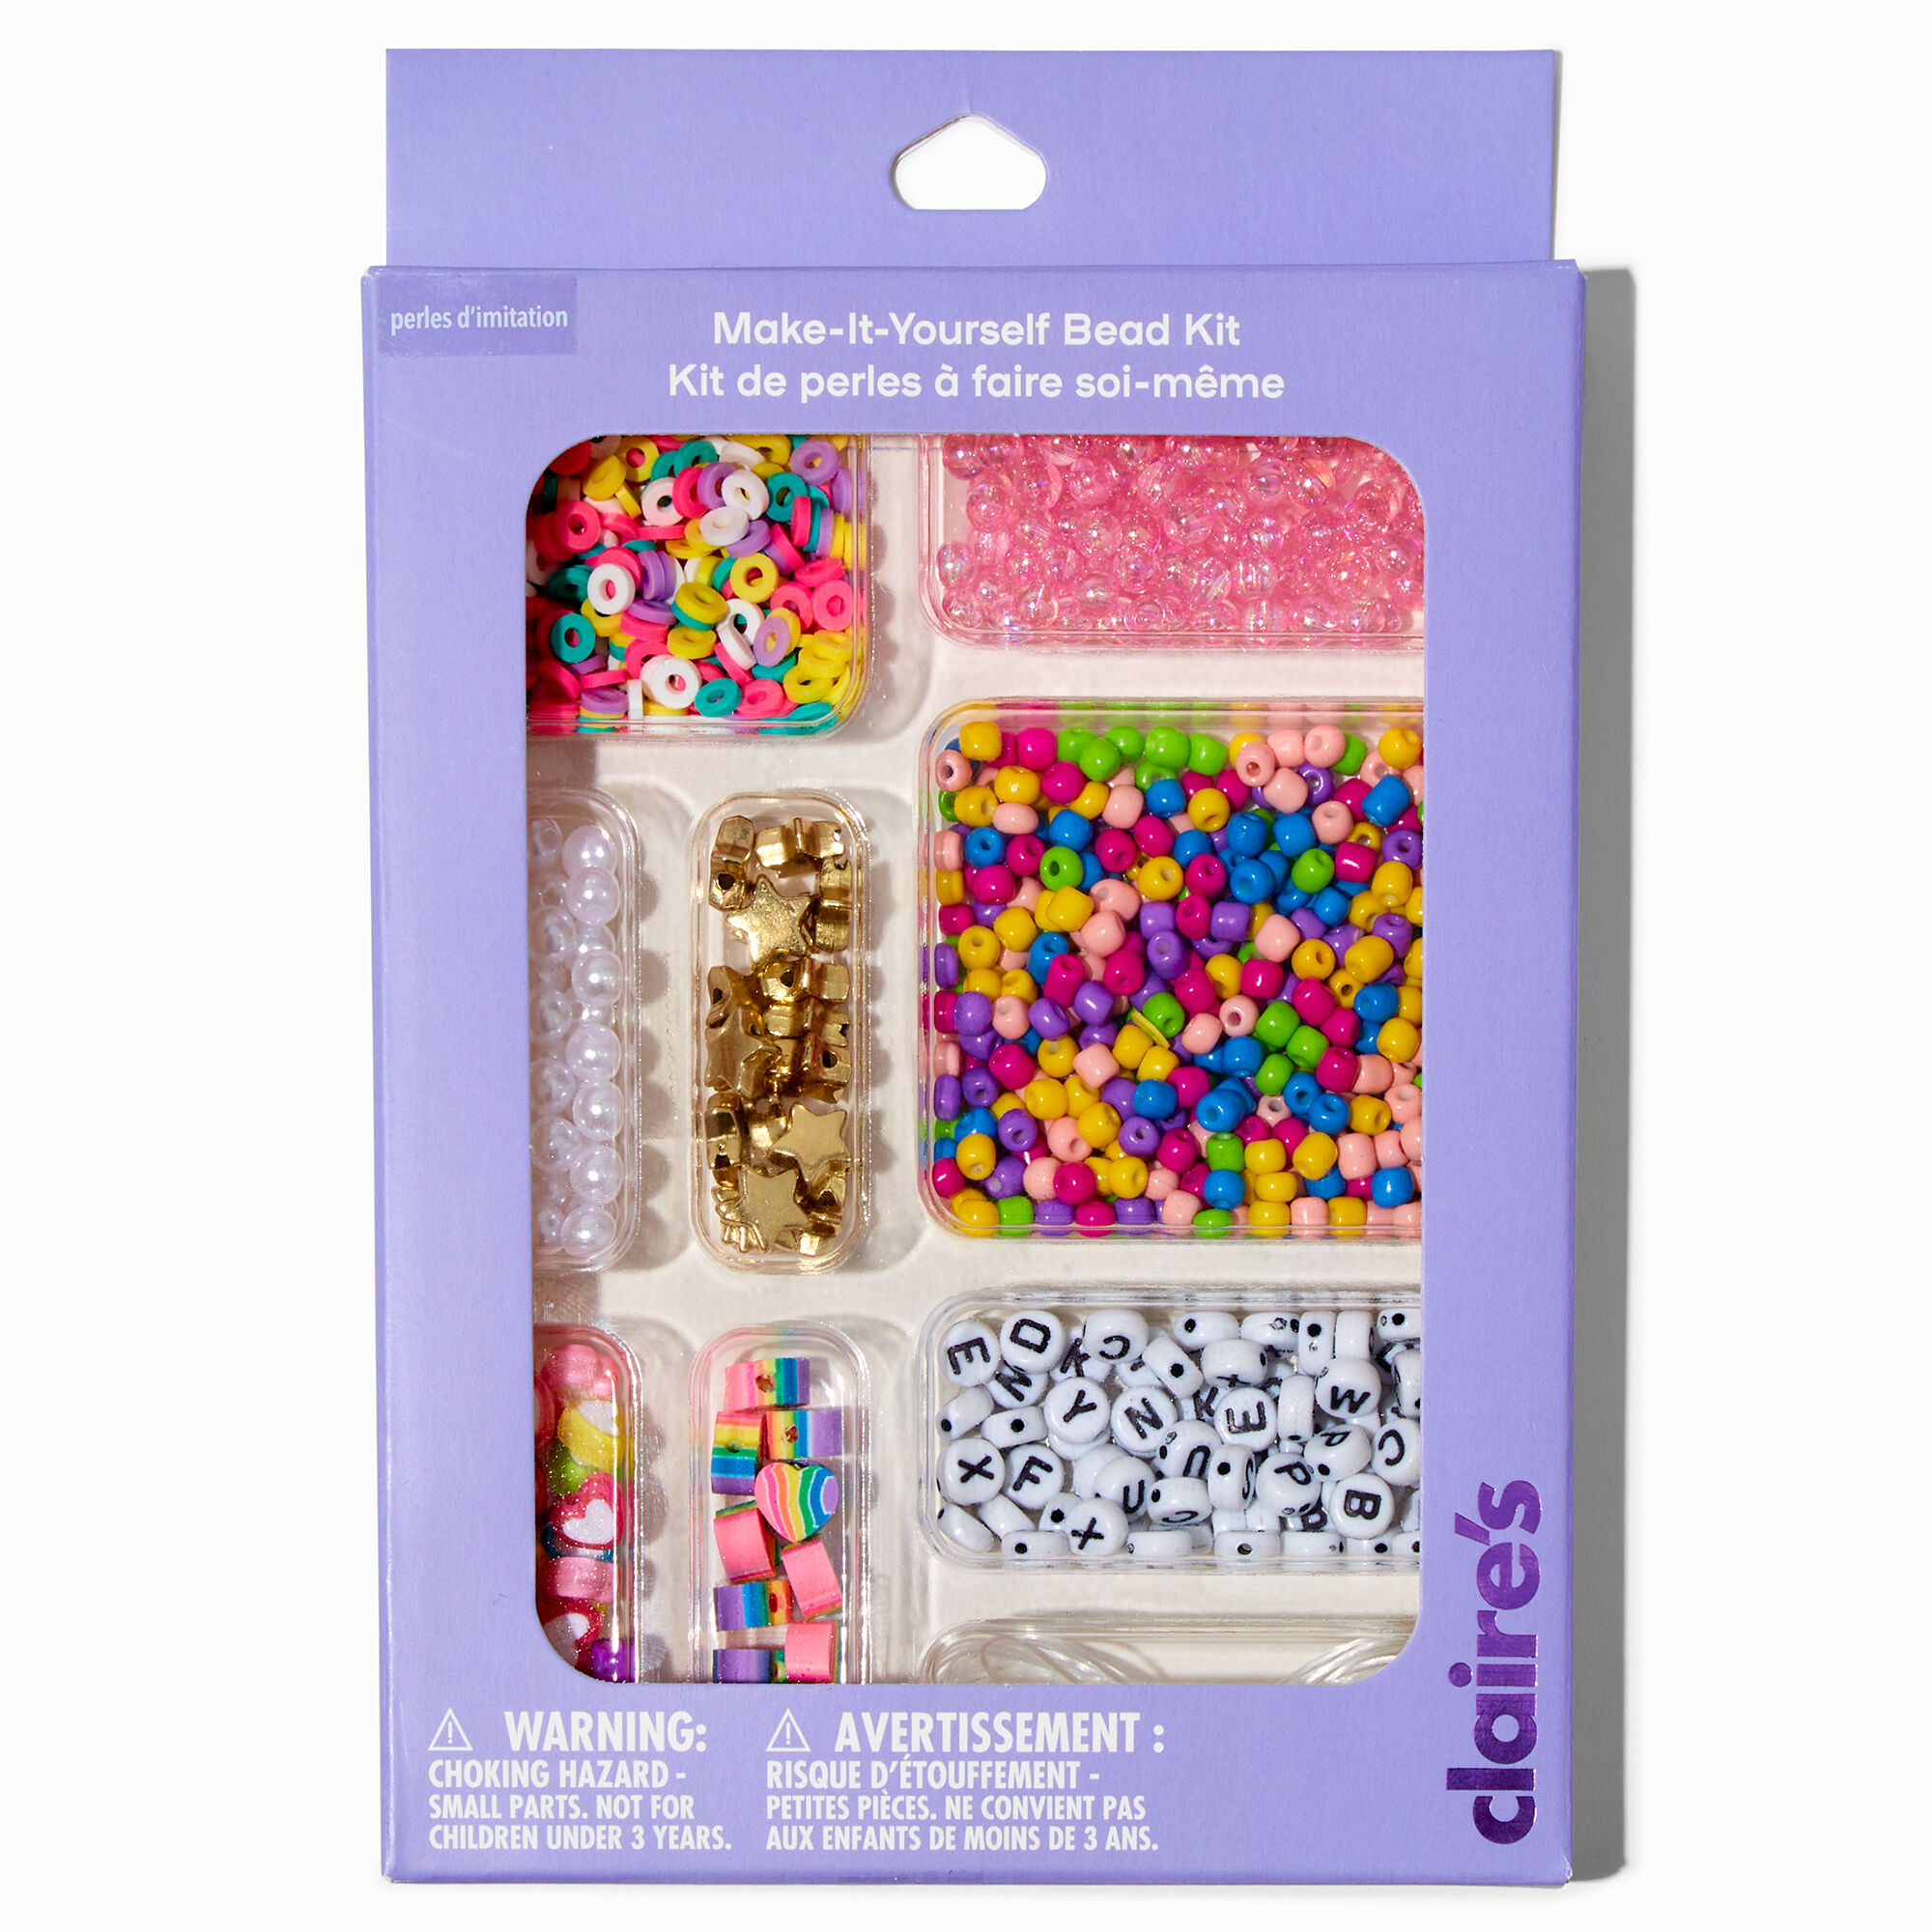 View Claires MakeItYourself Bead Kit information